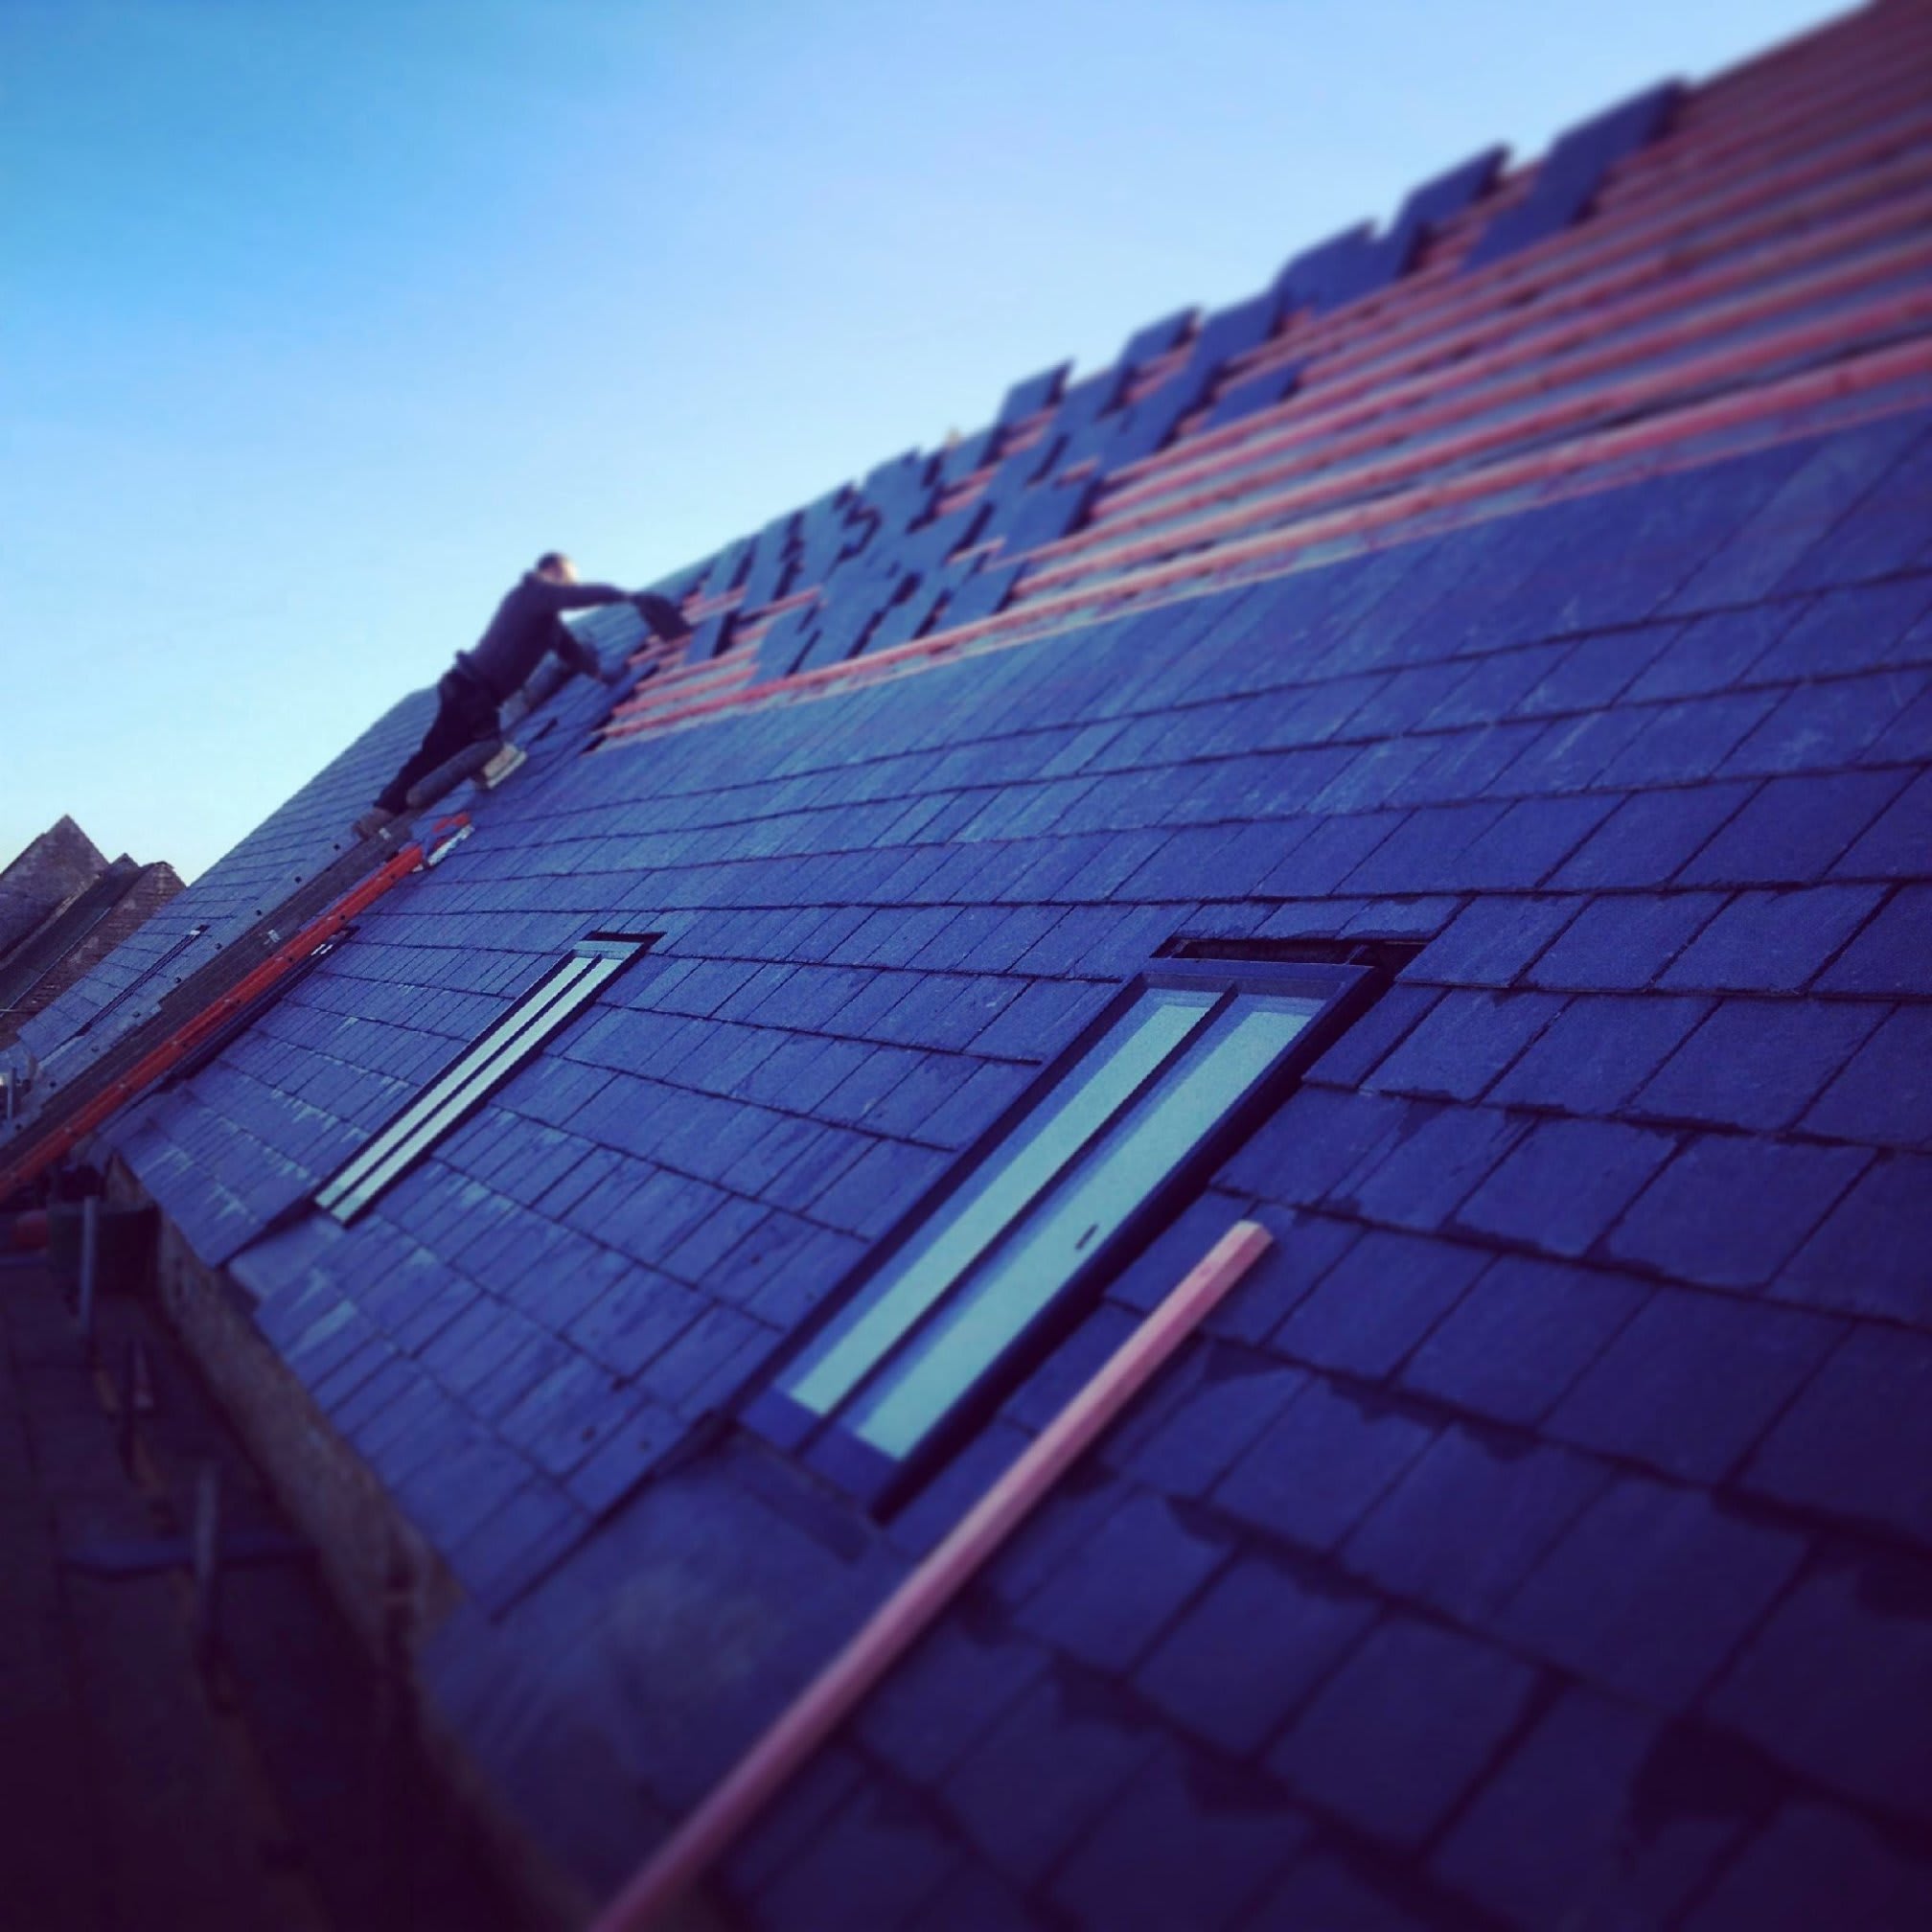 Images Sewards Roofing